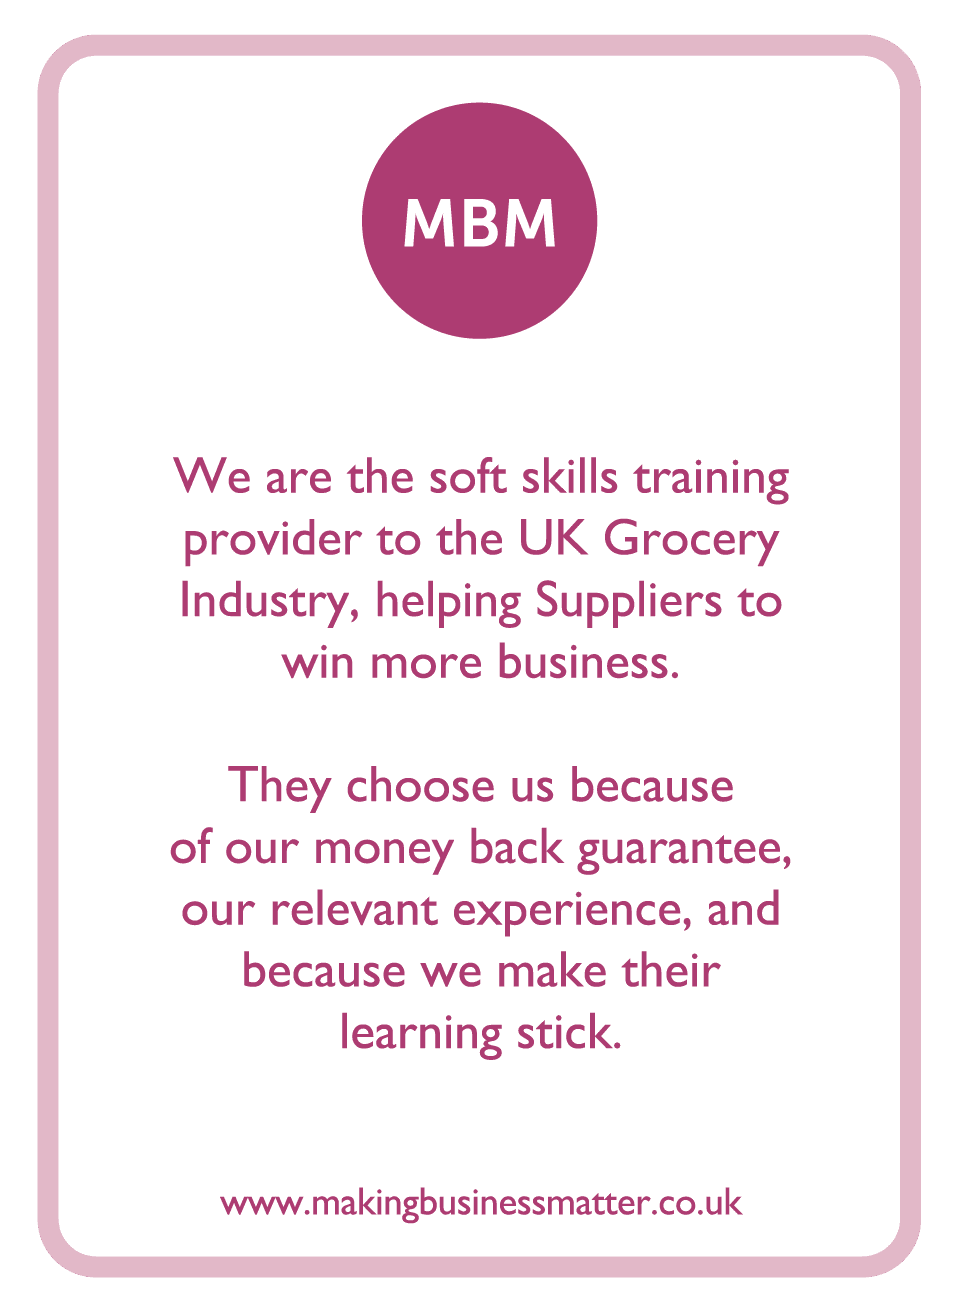 Coaching card with MBM info